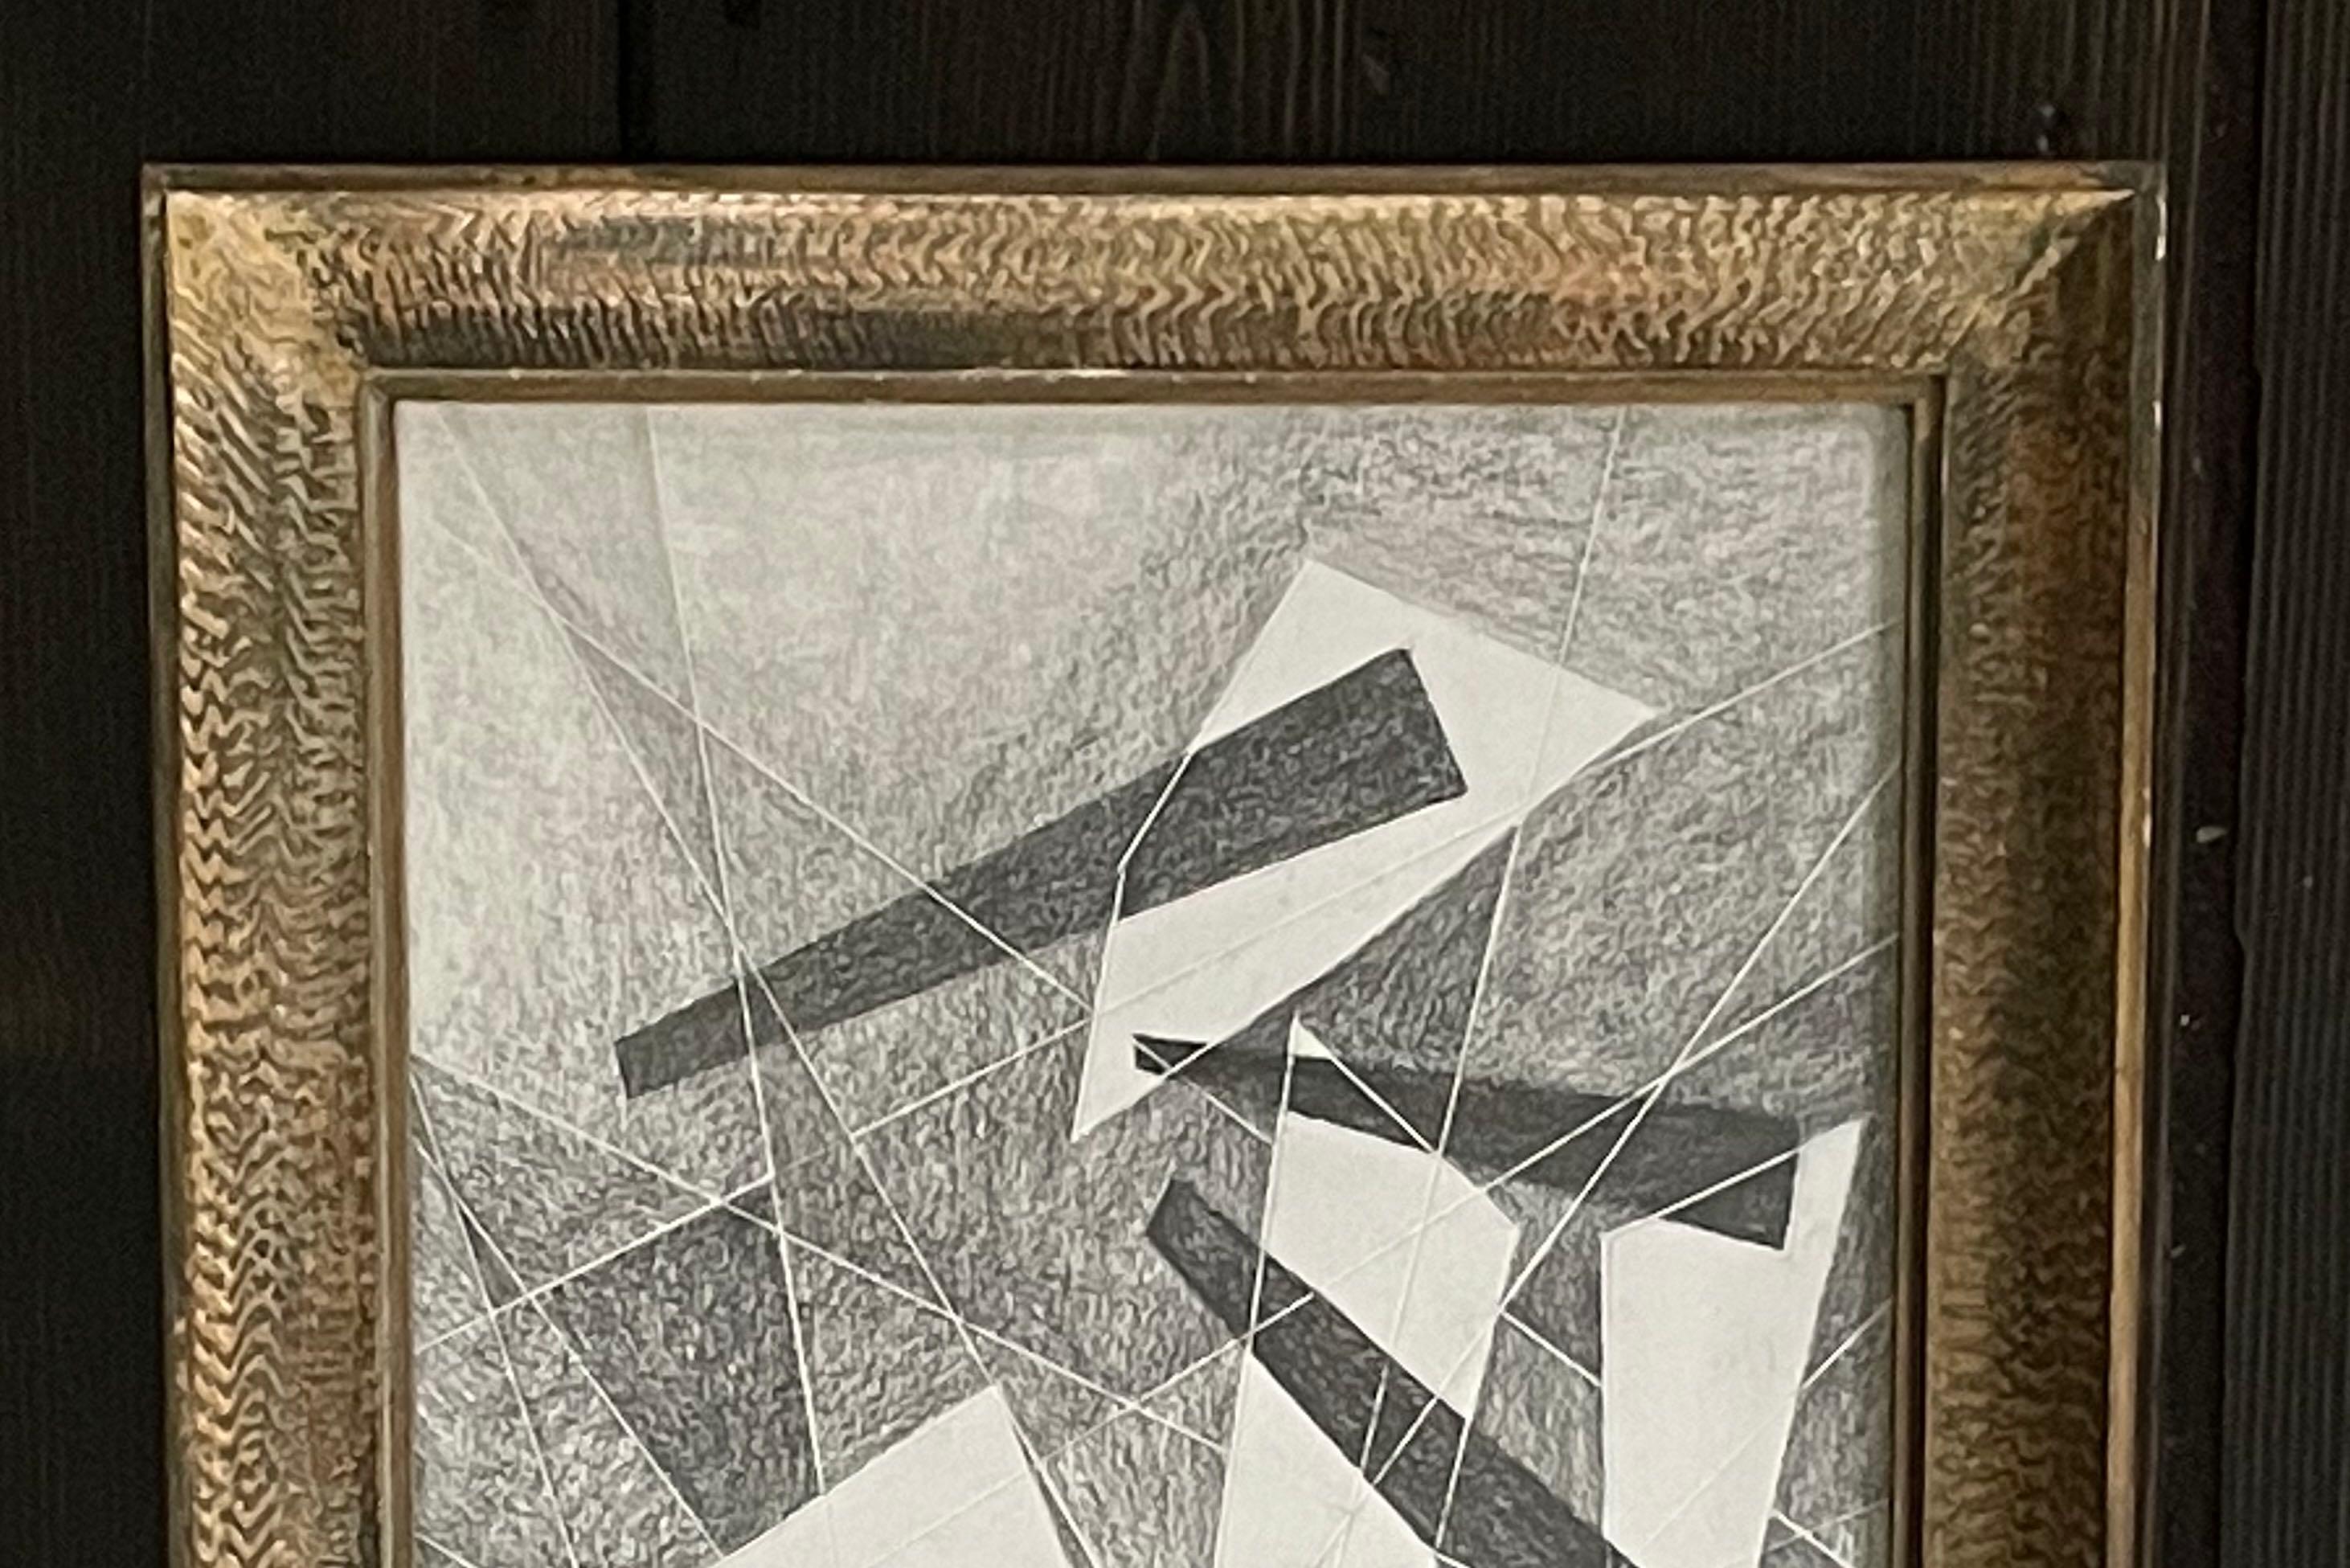 Original graphite drawing by American artist David Dew Bruner in 2015.
Study in trapezoid shapes.
Inspired by the artist Graham Sutherland.
This is one of many pieces from a large body of works by this artist.
Vintage gold gilt wood frame. 
